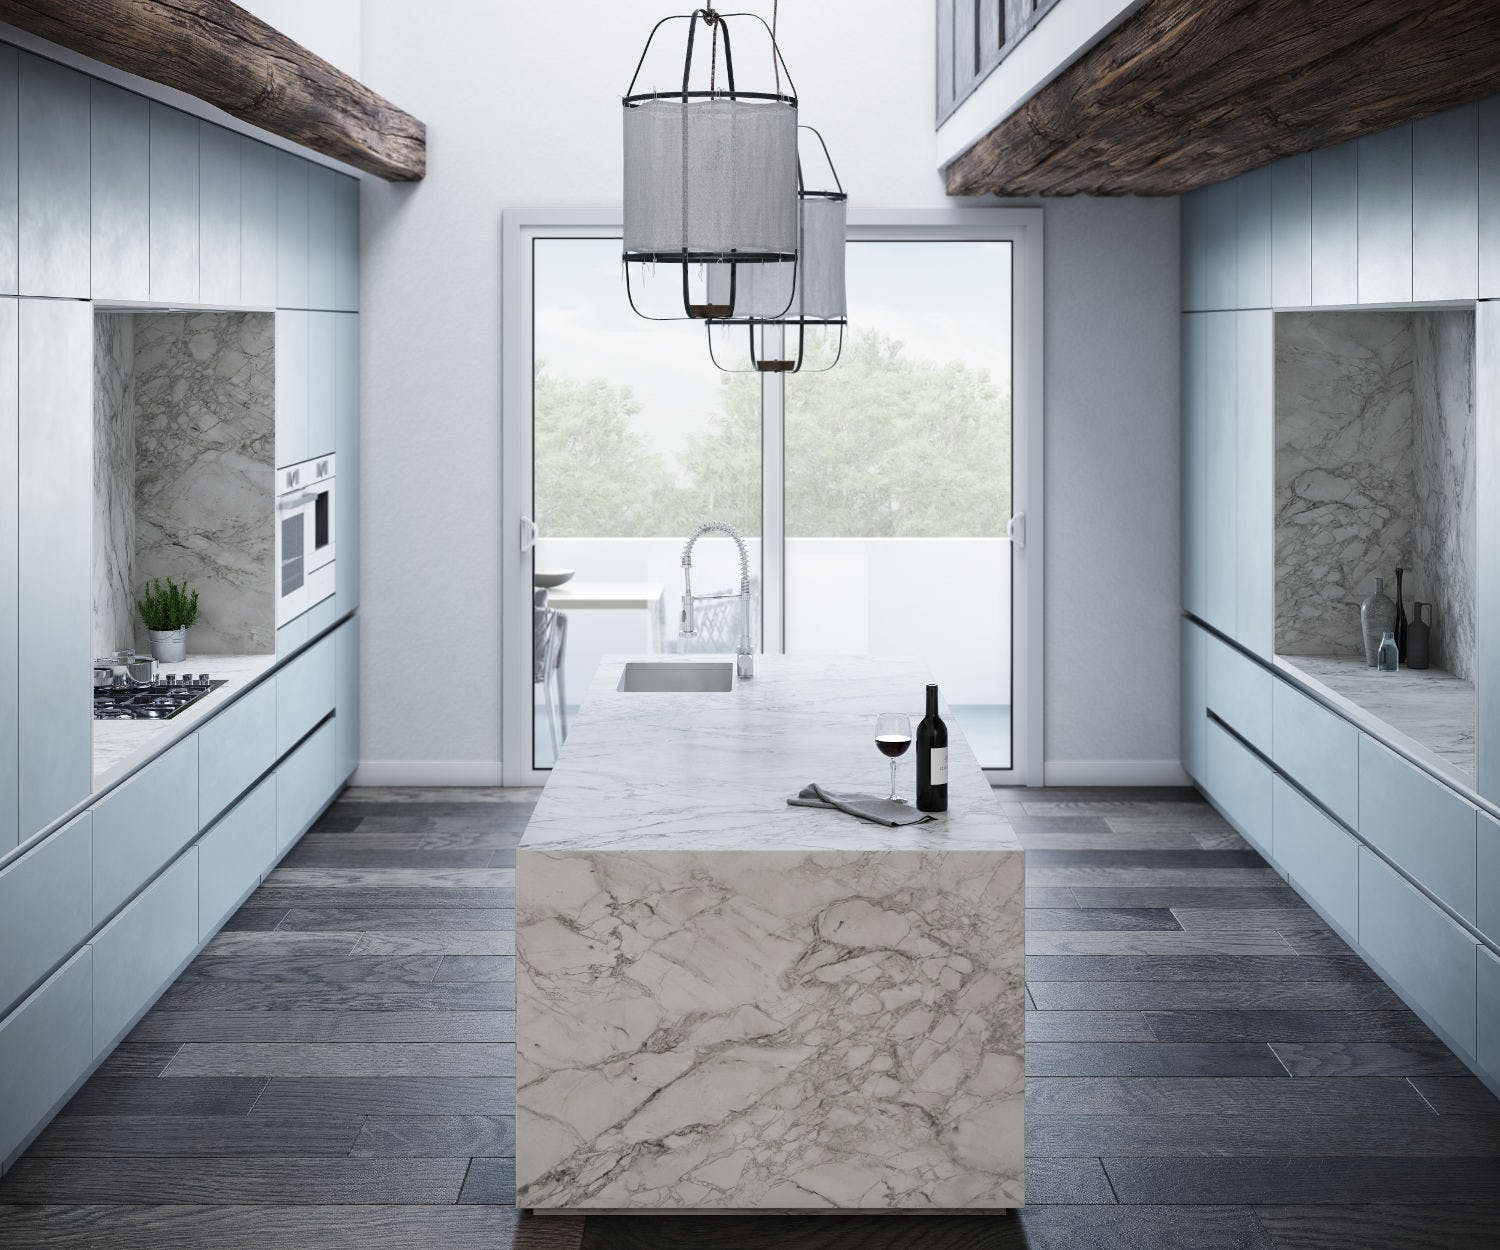 Image of Dekton Kitchen Portum Velvet 1 in Compact kitchens: Who says they're a disadvantage? - Cosentino